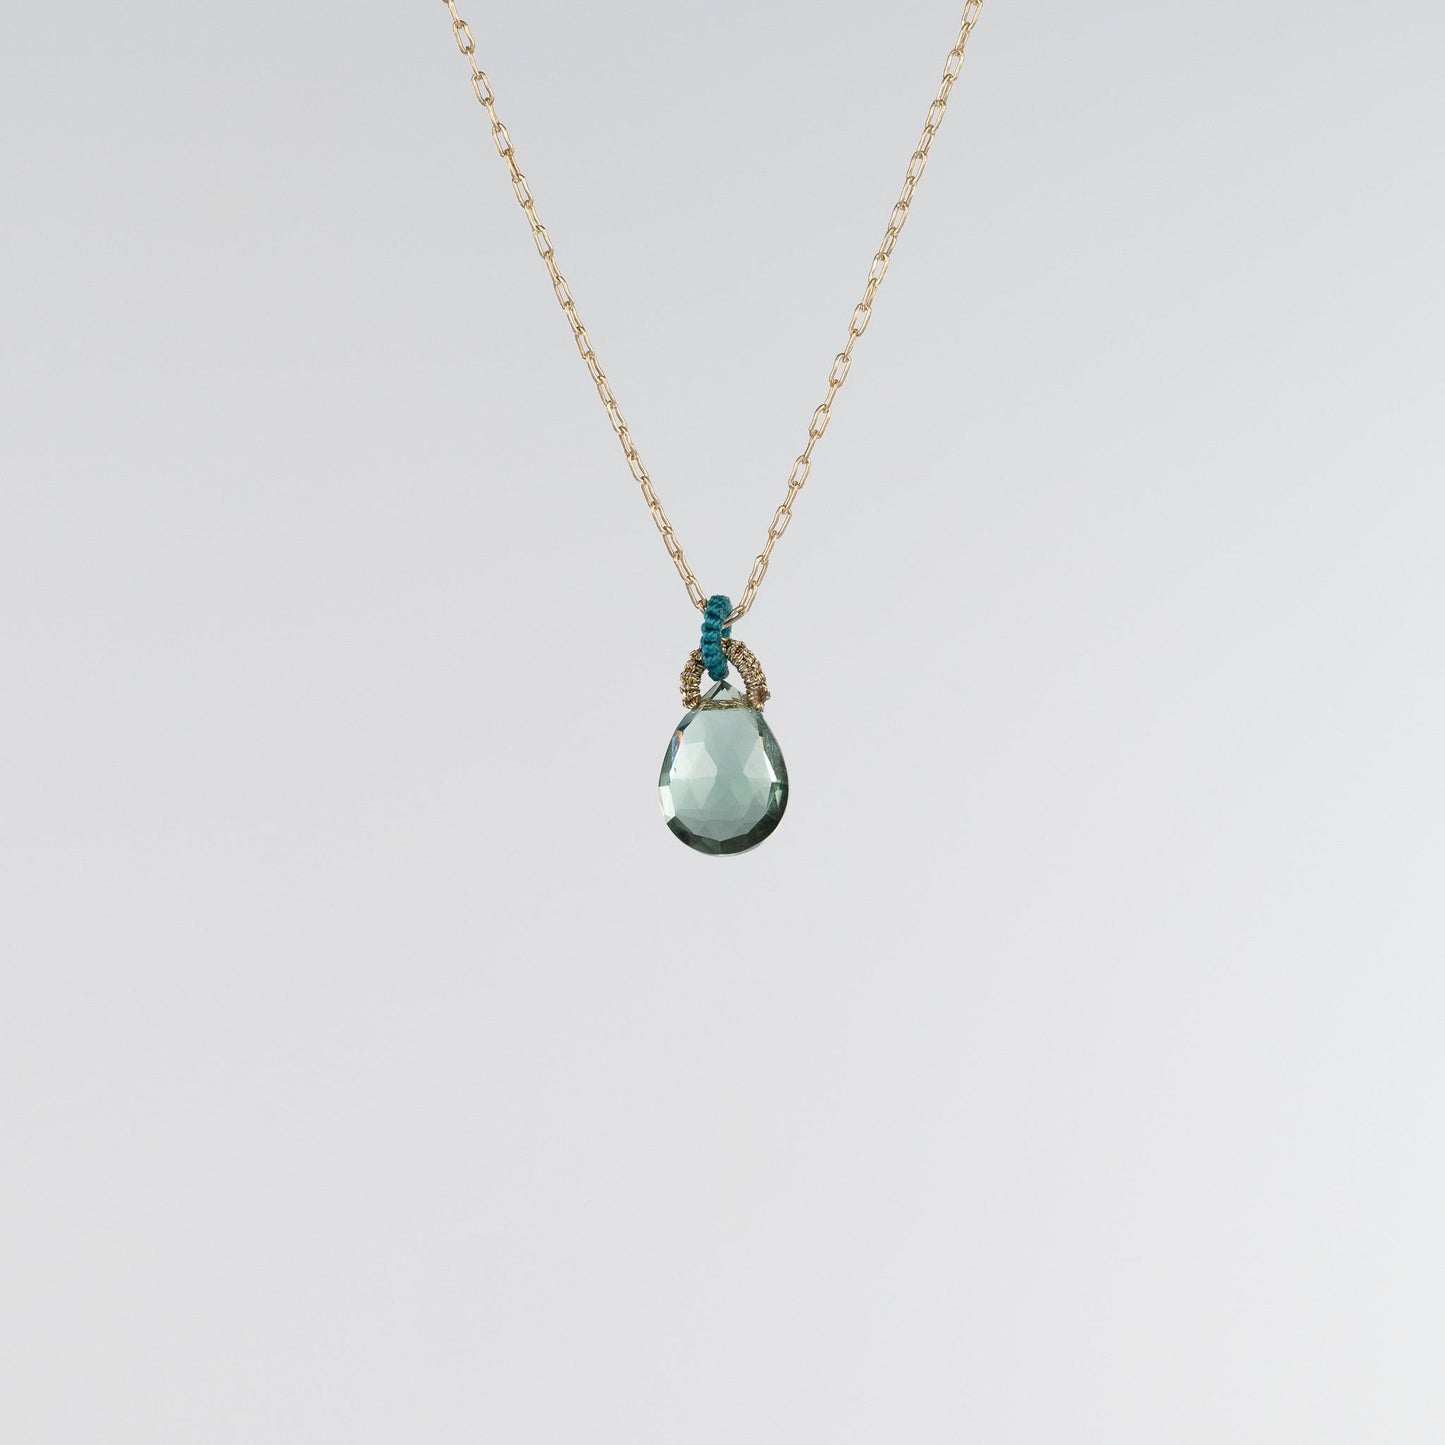 Danielle Welmond Indicolite Drop Necklace with Coordinating Soft Green Silk Cord